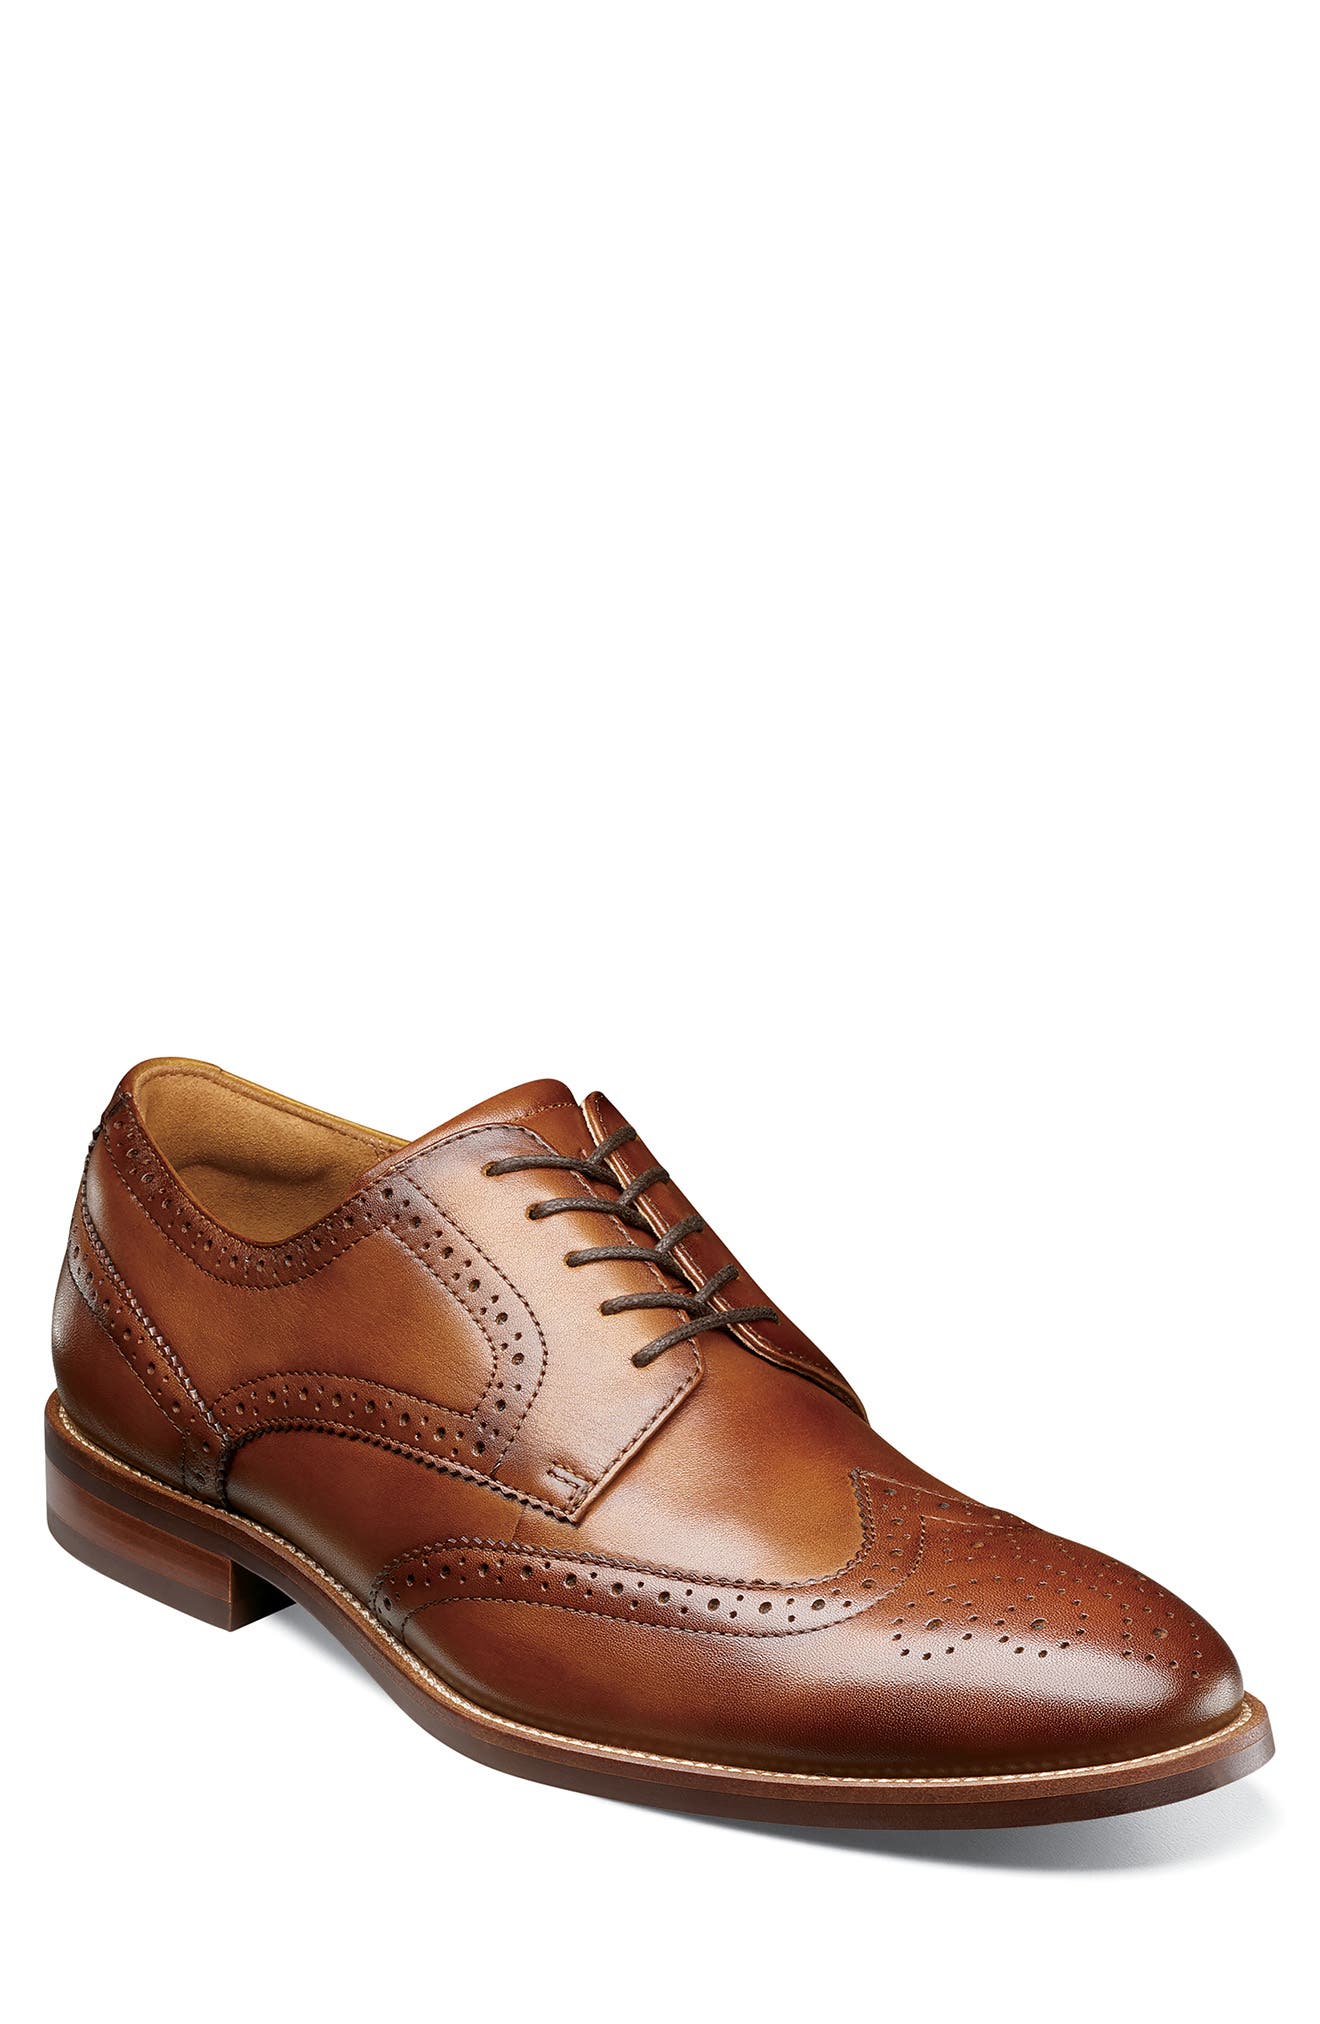 Shoes & Jewelry Shoes Shoes SZ Florsheim Matera II Wingtip Oxford Clothing 